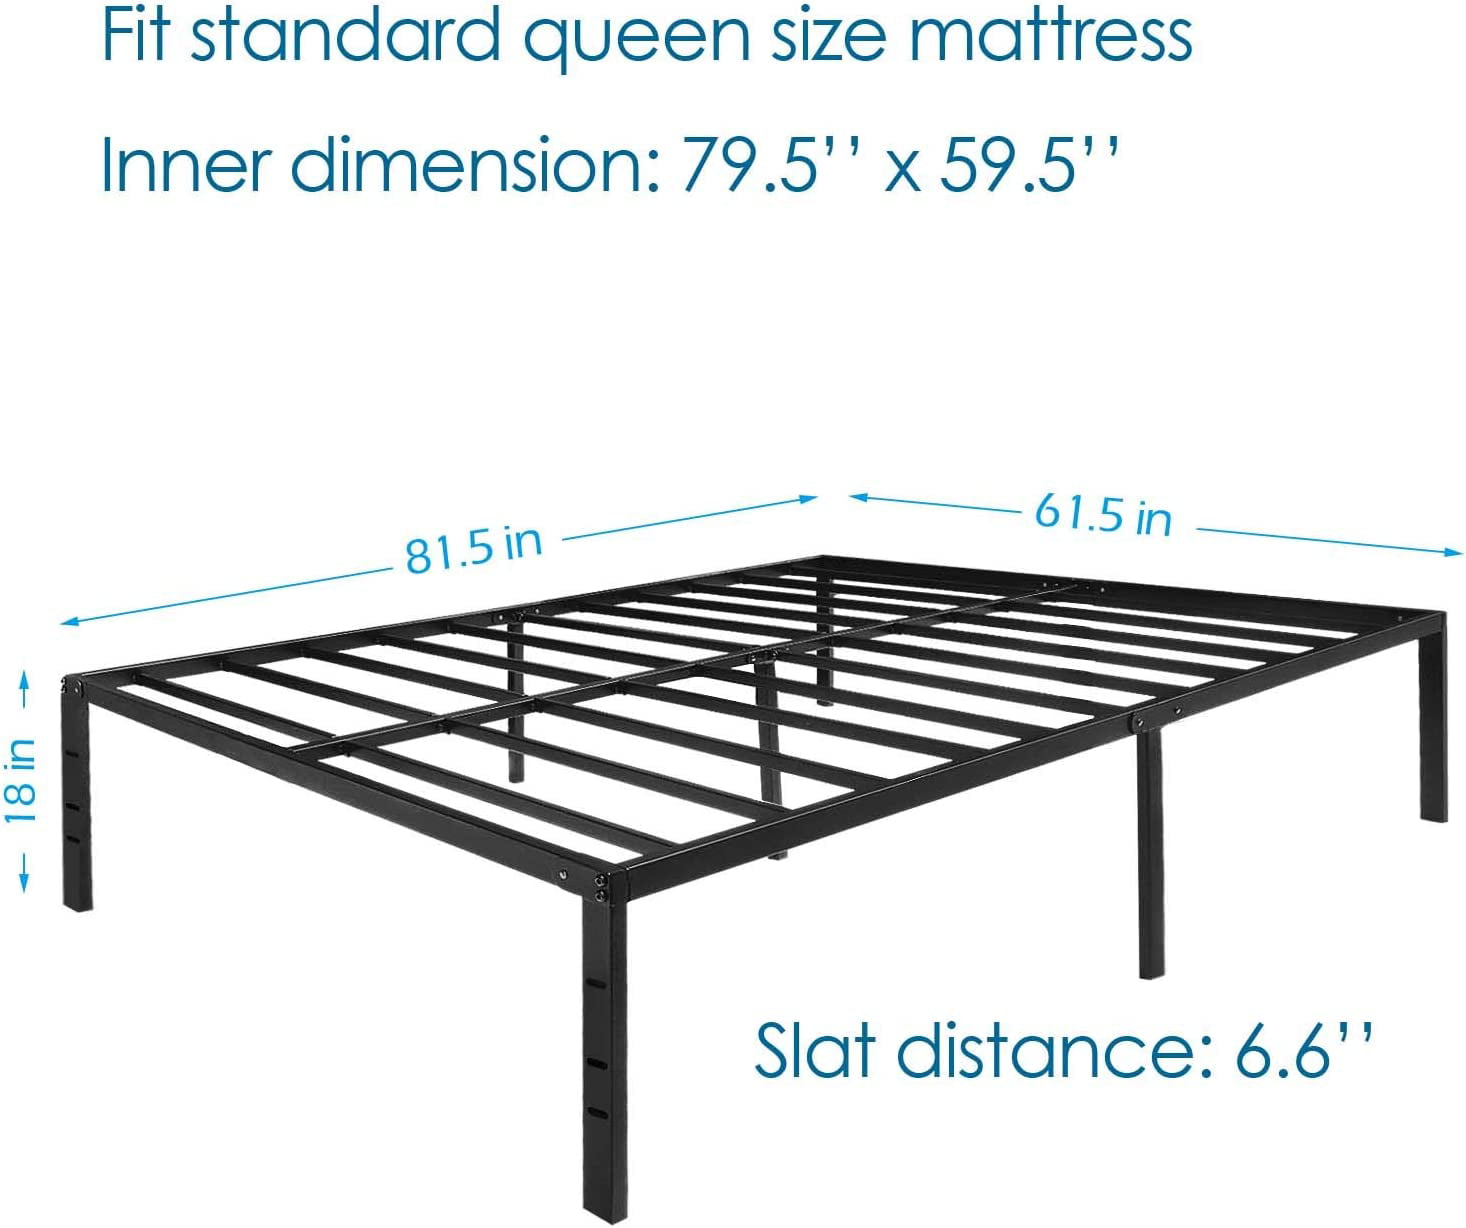 FOYUEE 18 inch Full Bed Frame No Box Spring Needed, Tall Platform Bedframe with Storage Black Metal